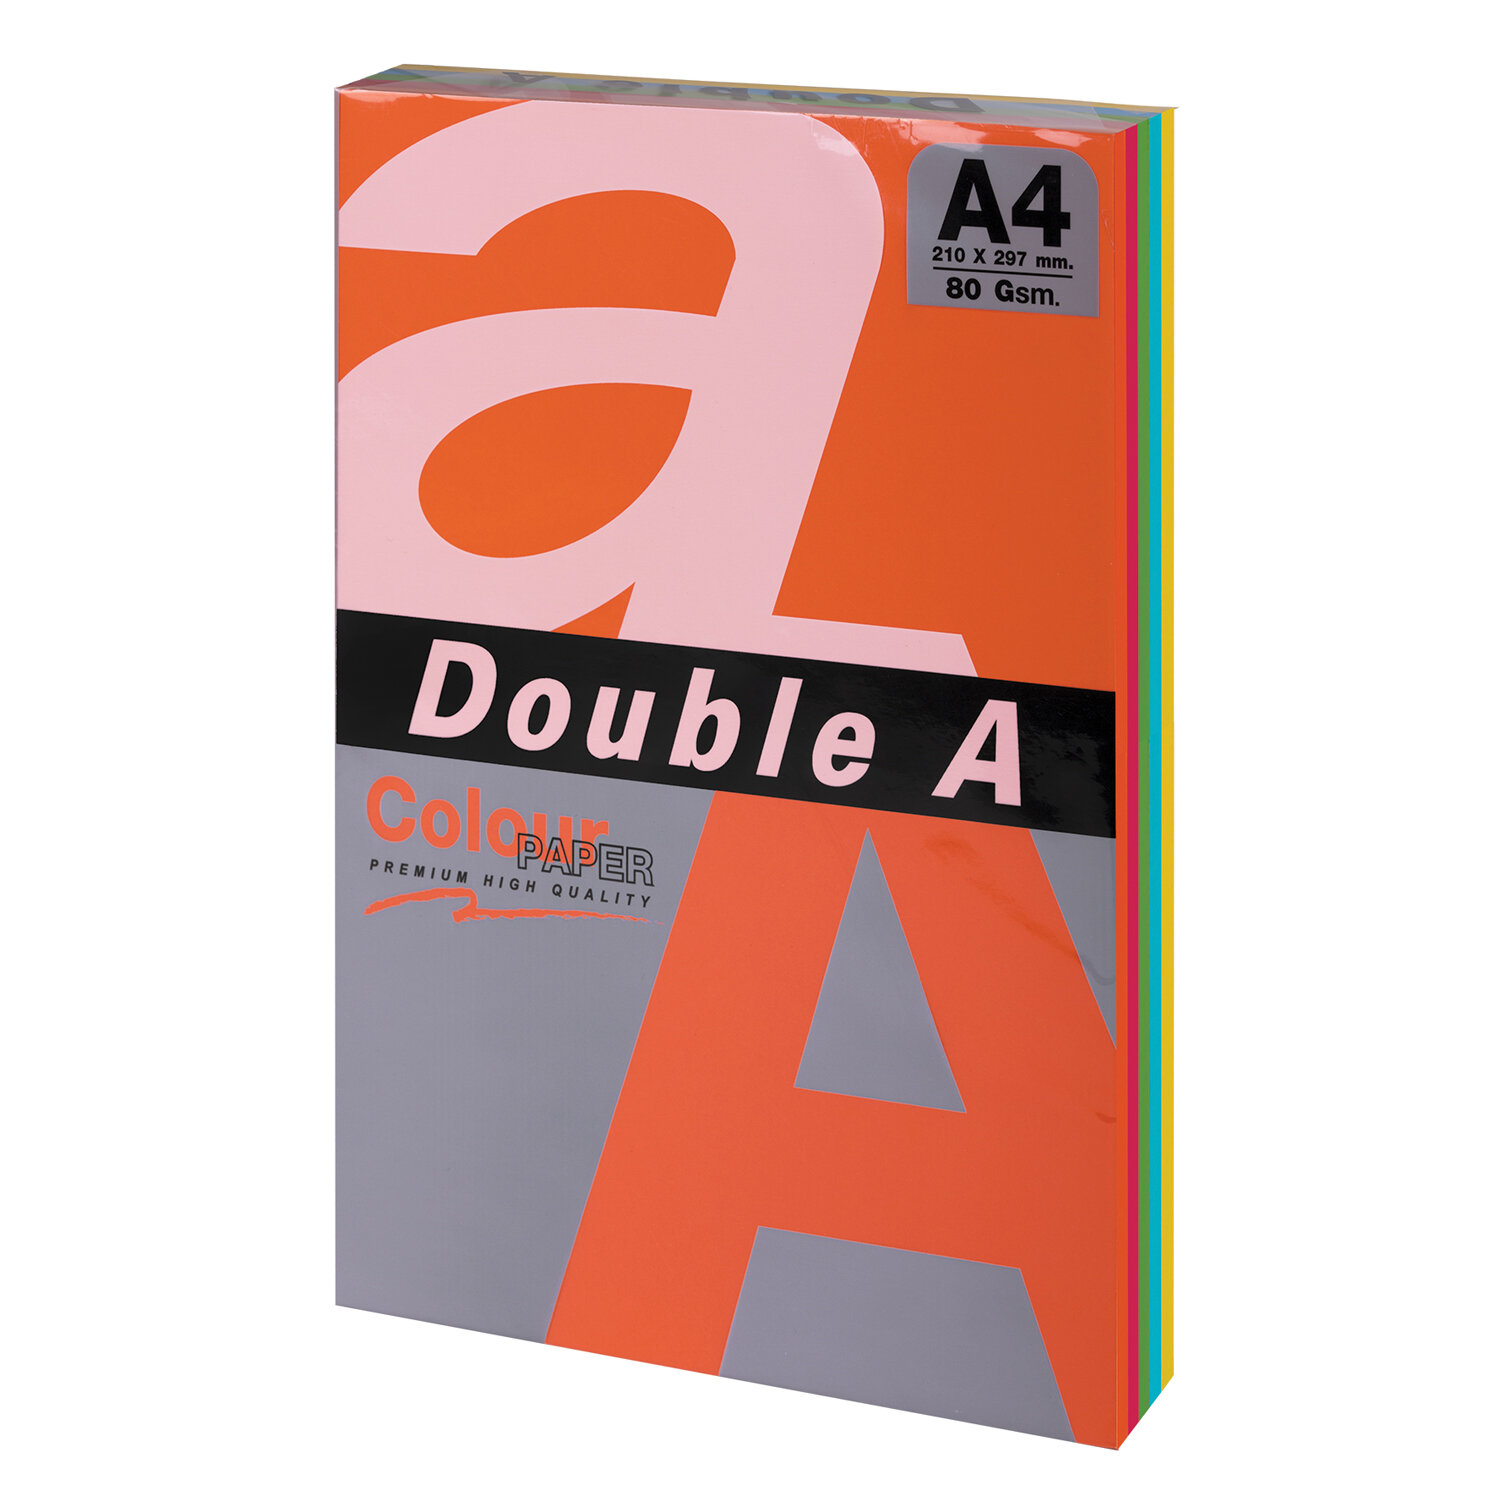   DOUBLE A 4, 80 /2, 100 ., 5   20 .,  